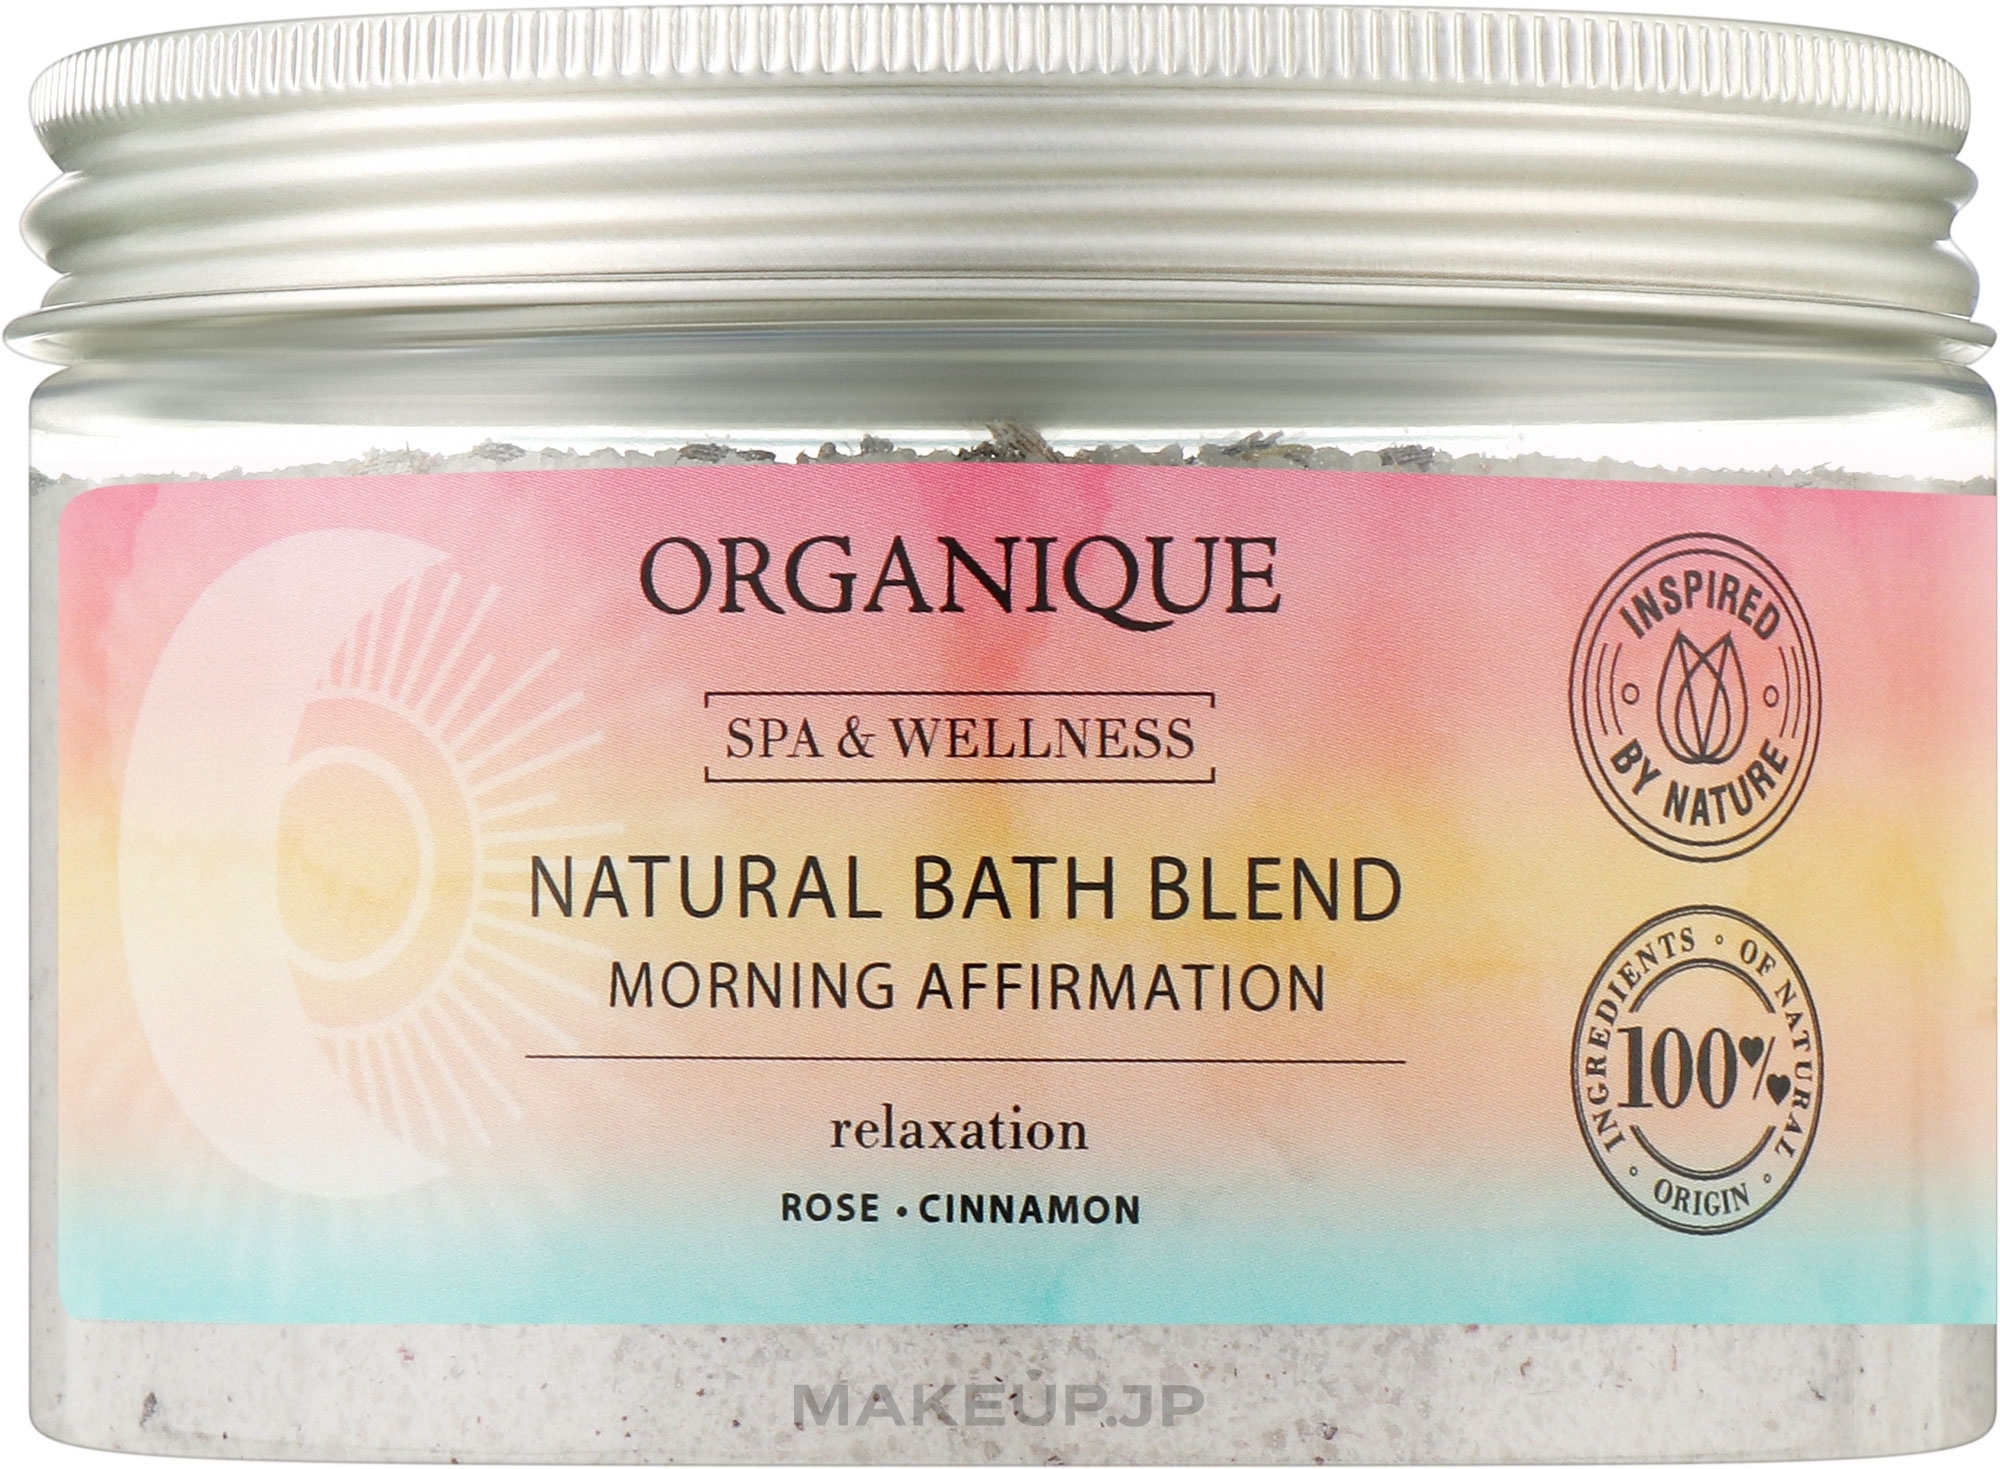 Aromatic Bath Blend 'Rose & Cinnamon' - Organique Spa & Wellness Affirmation Of The Day — photo 450 g